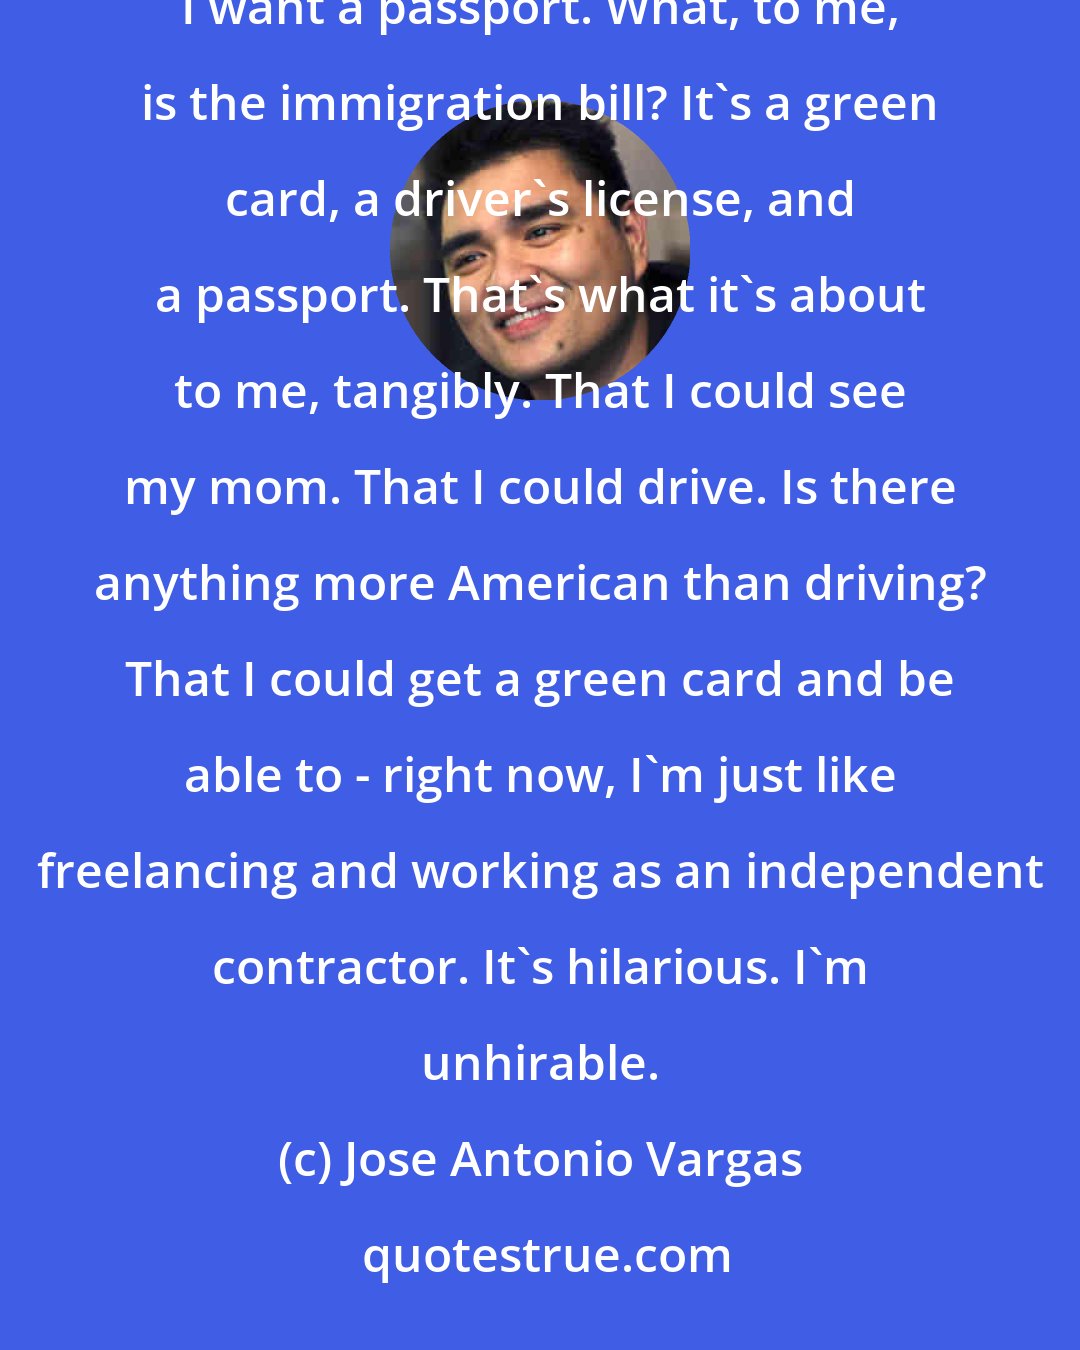 Jose Antonio Vargas: Like other undocumented people in this country, I want a green card, and I want a driver's license, and I want a passport. What, to me, is the immigration bill? It's a green card, a driver's license, and a passport. That's what it's about to me, tangibly. That I could see my mom. That I could drive. Is there anything more American than driving? That I could get a green card and be able to - right now, I'm just like freelancing and working as an independent contractor. It's hilarious. I'm unhirable.